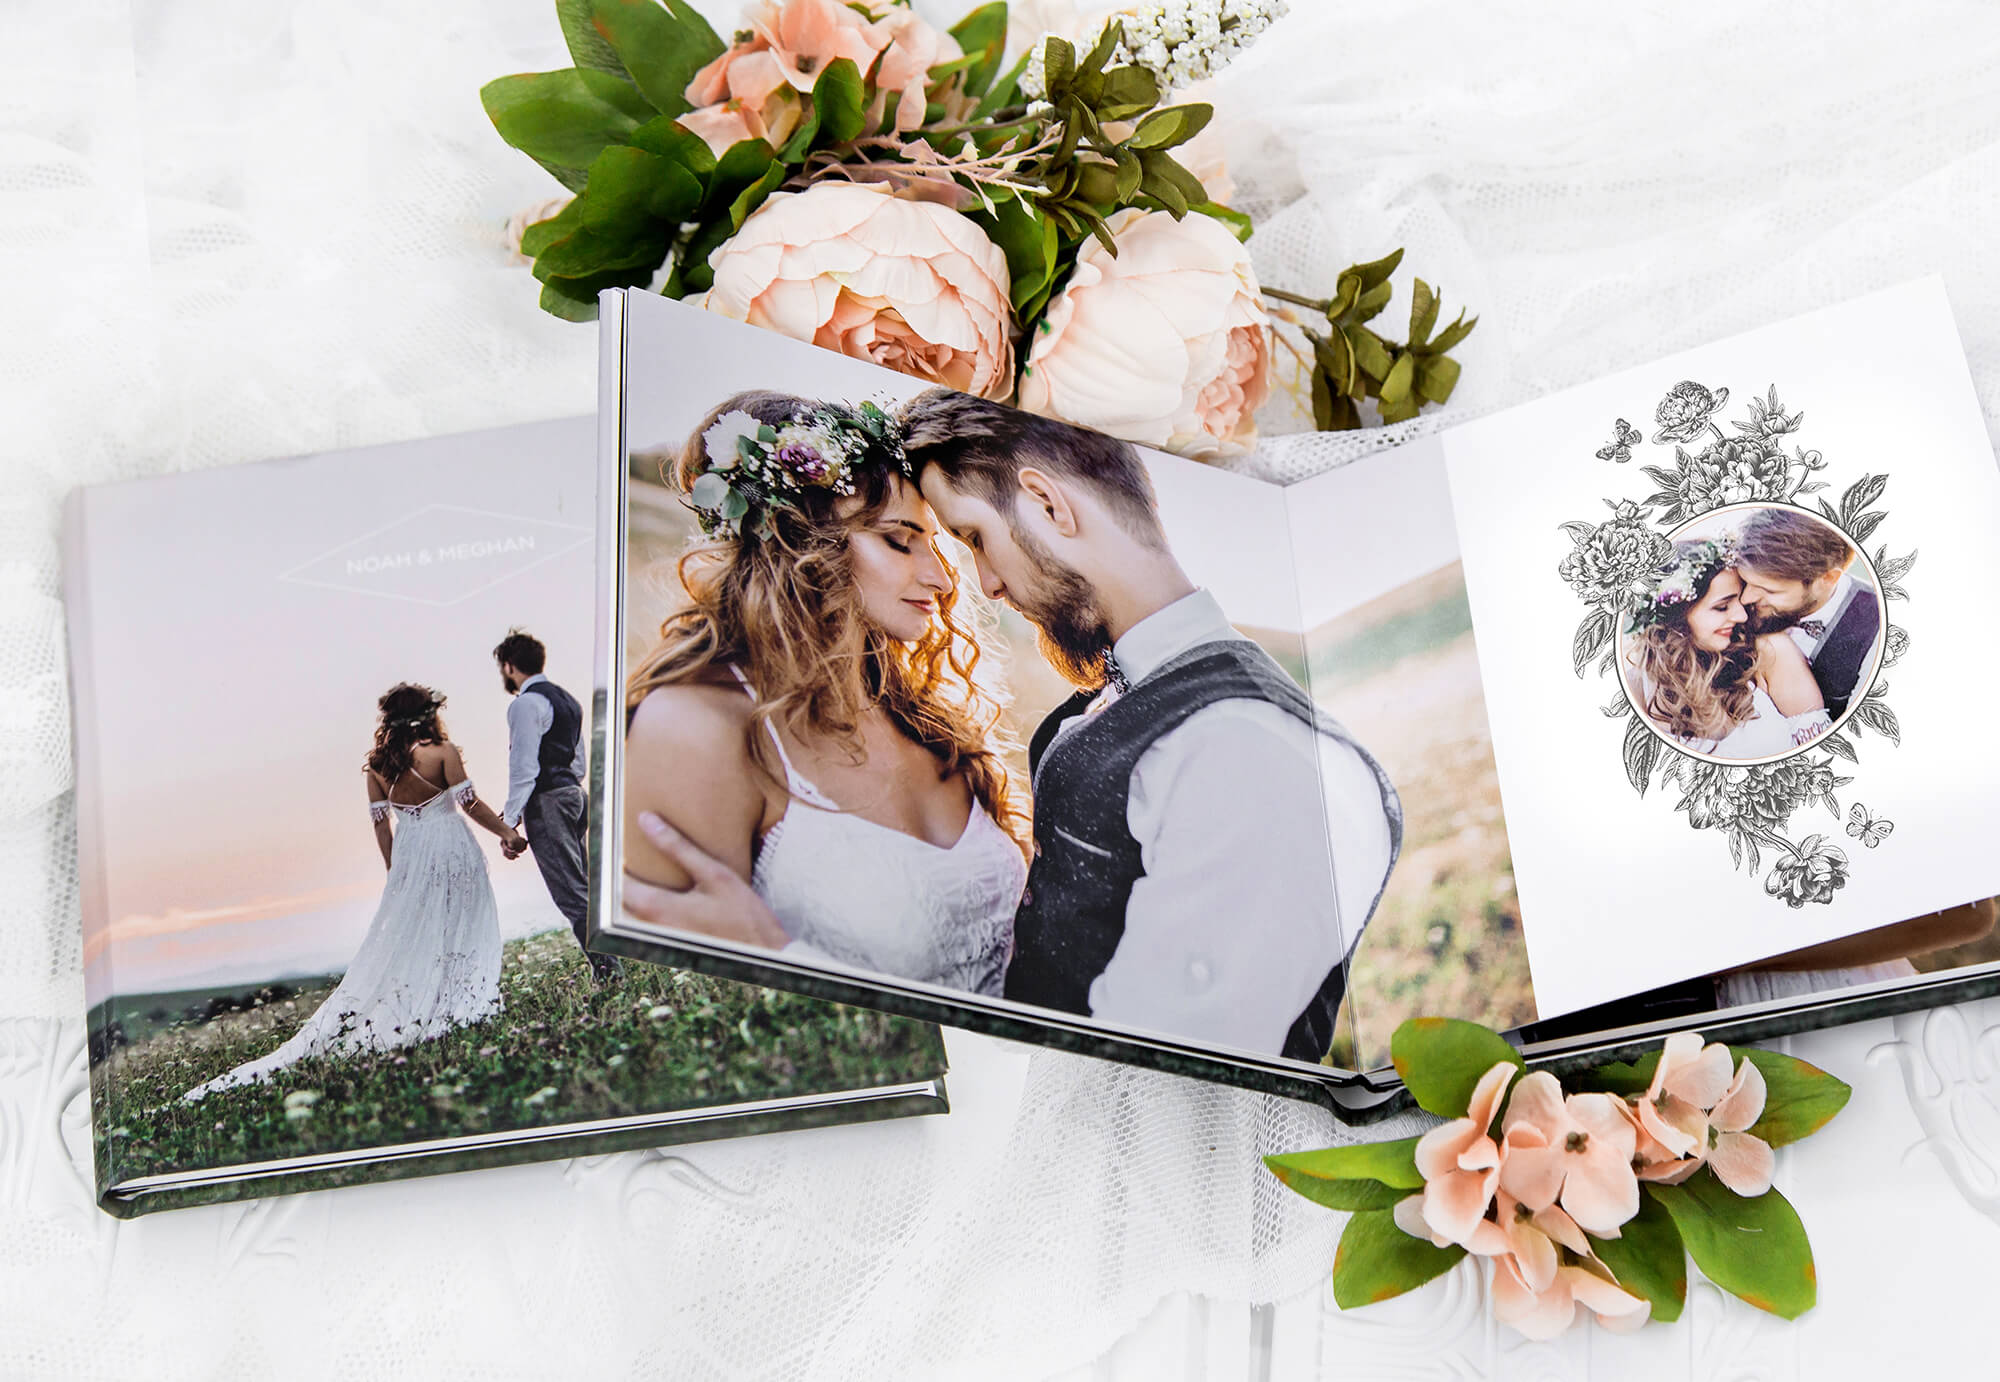 3 Wedding Album Best-Sellers For Every Style - Printique, An